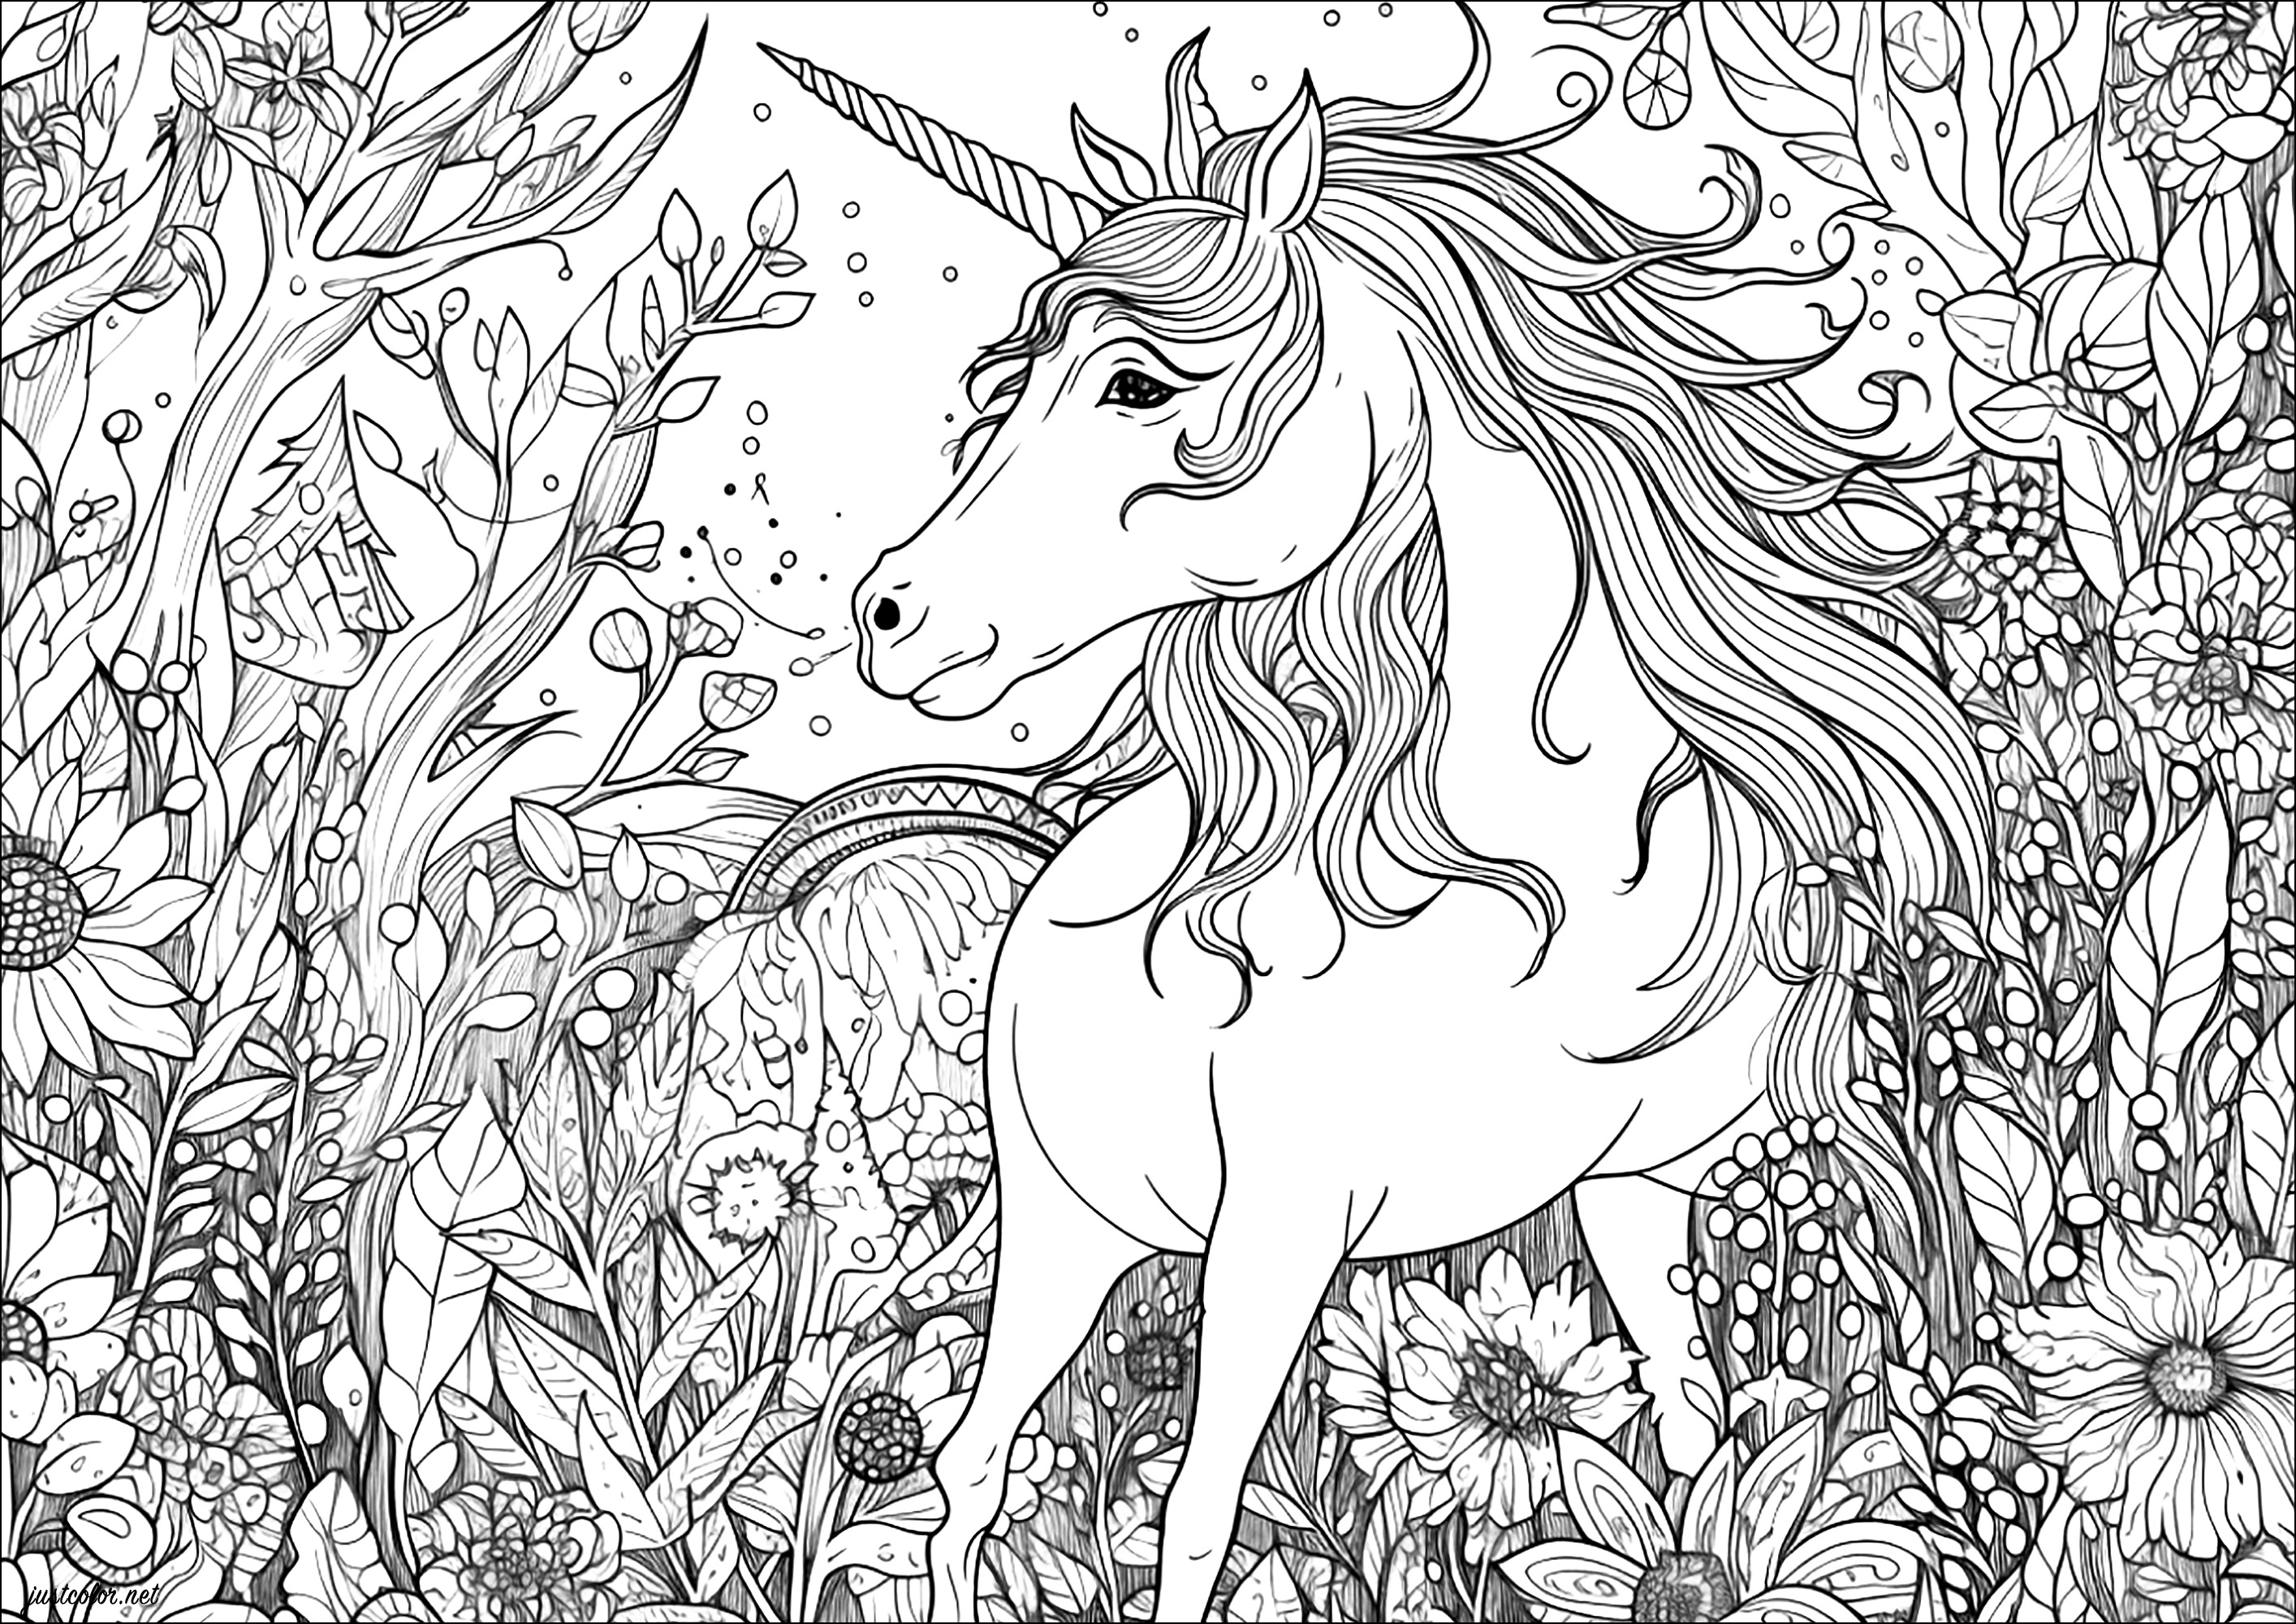 Pretty unicorn in a forest. Lots of details to color, for a magical coloring experience